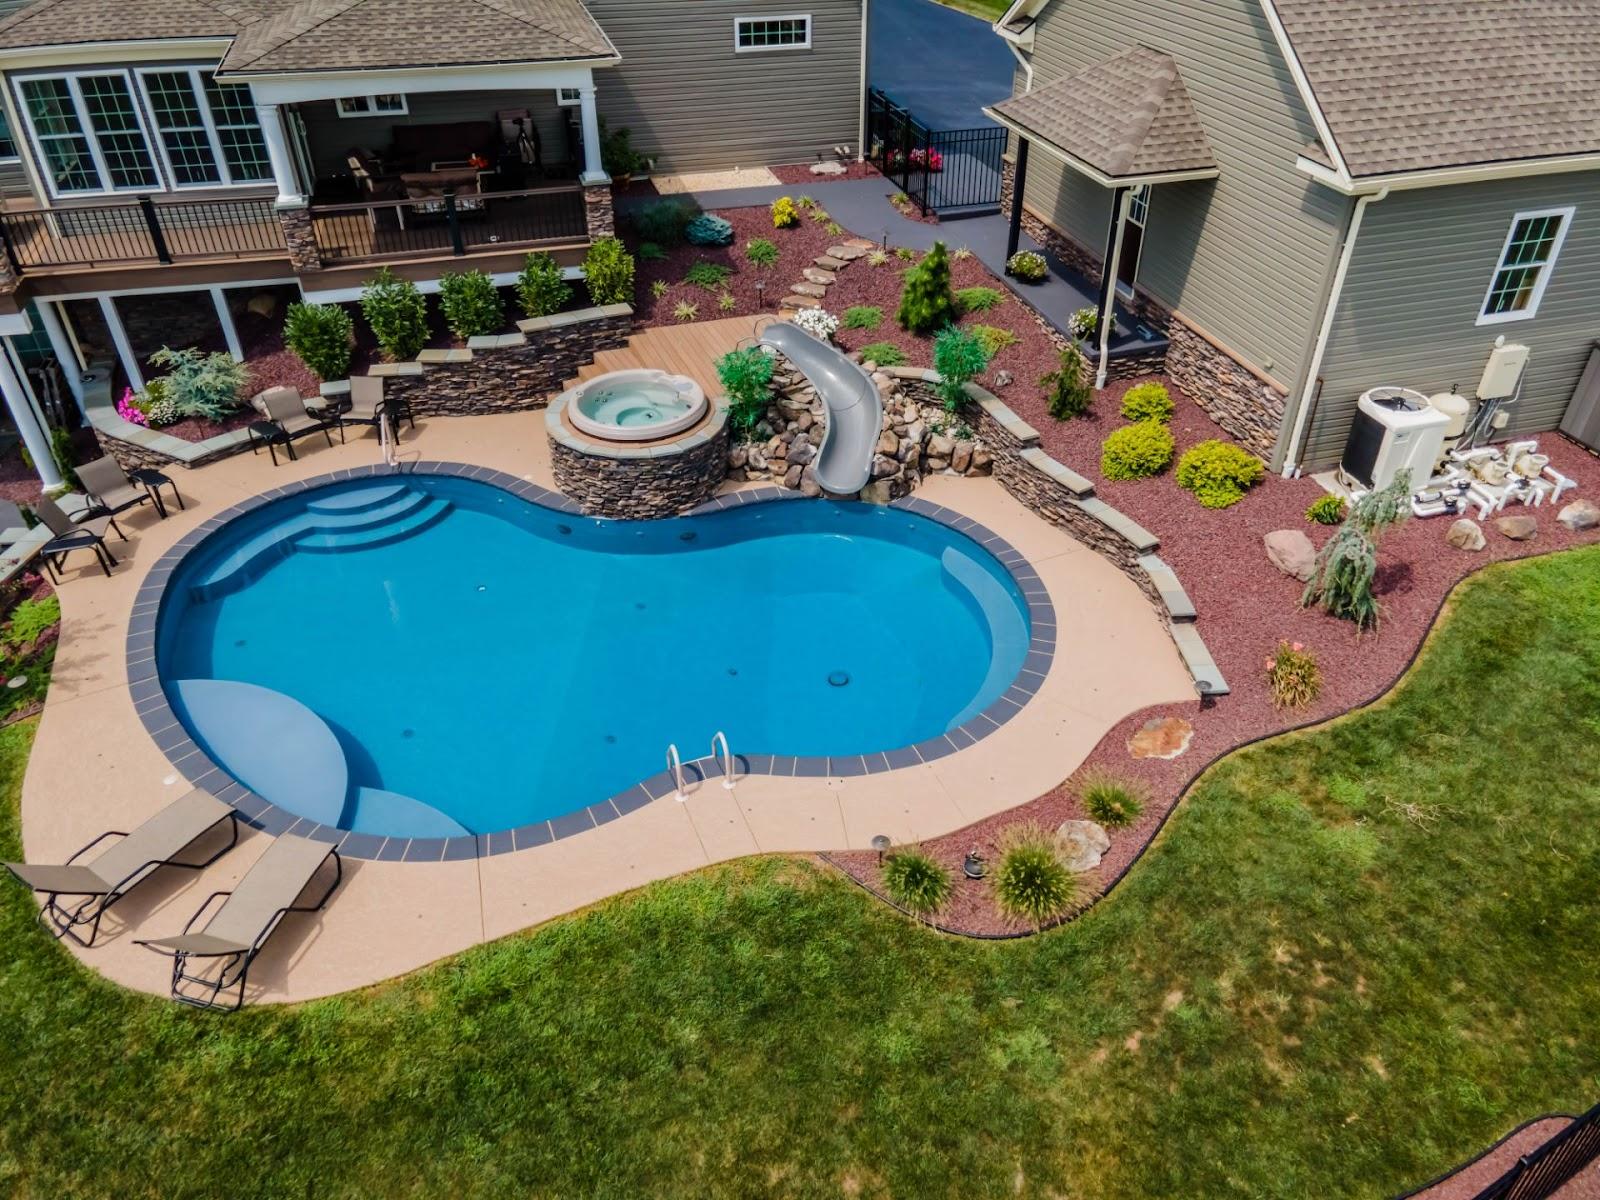 Is a Vinyl Liner Pool Right for My Growing Family?